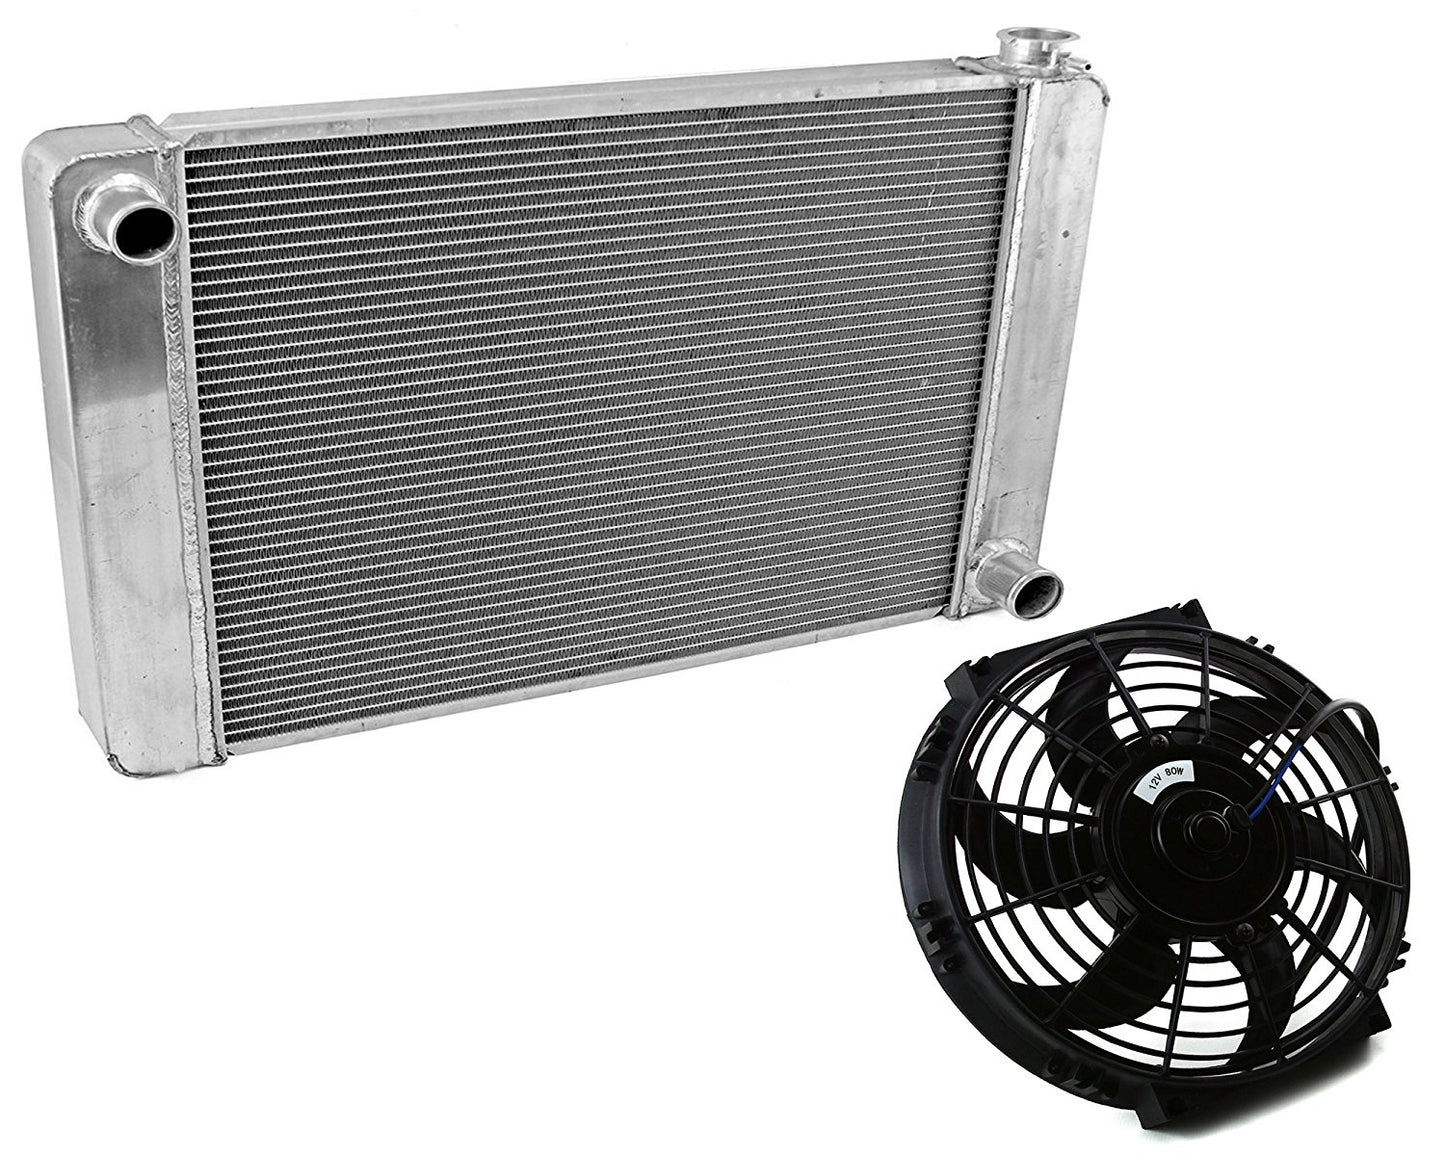 For SBC BBC Chevy GM Fabricated Aluminum Radiator 21" x 19" x3" &10" Electric Curved Blade Cooling Fan